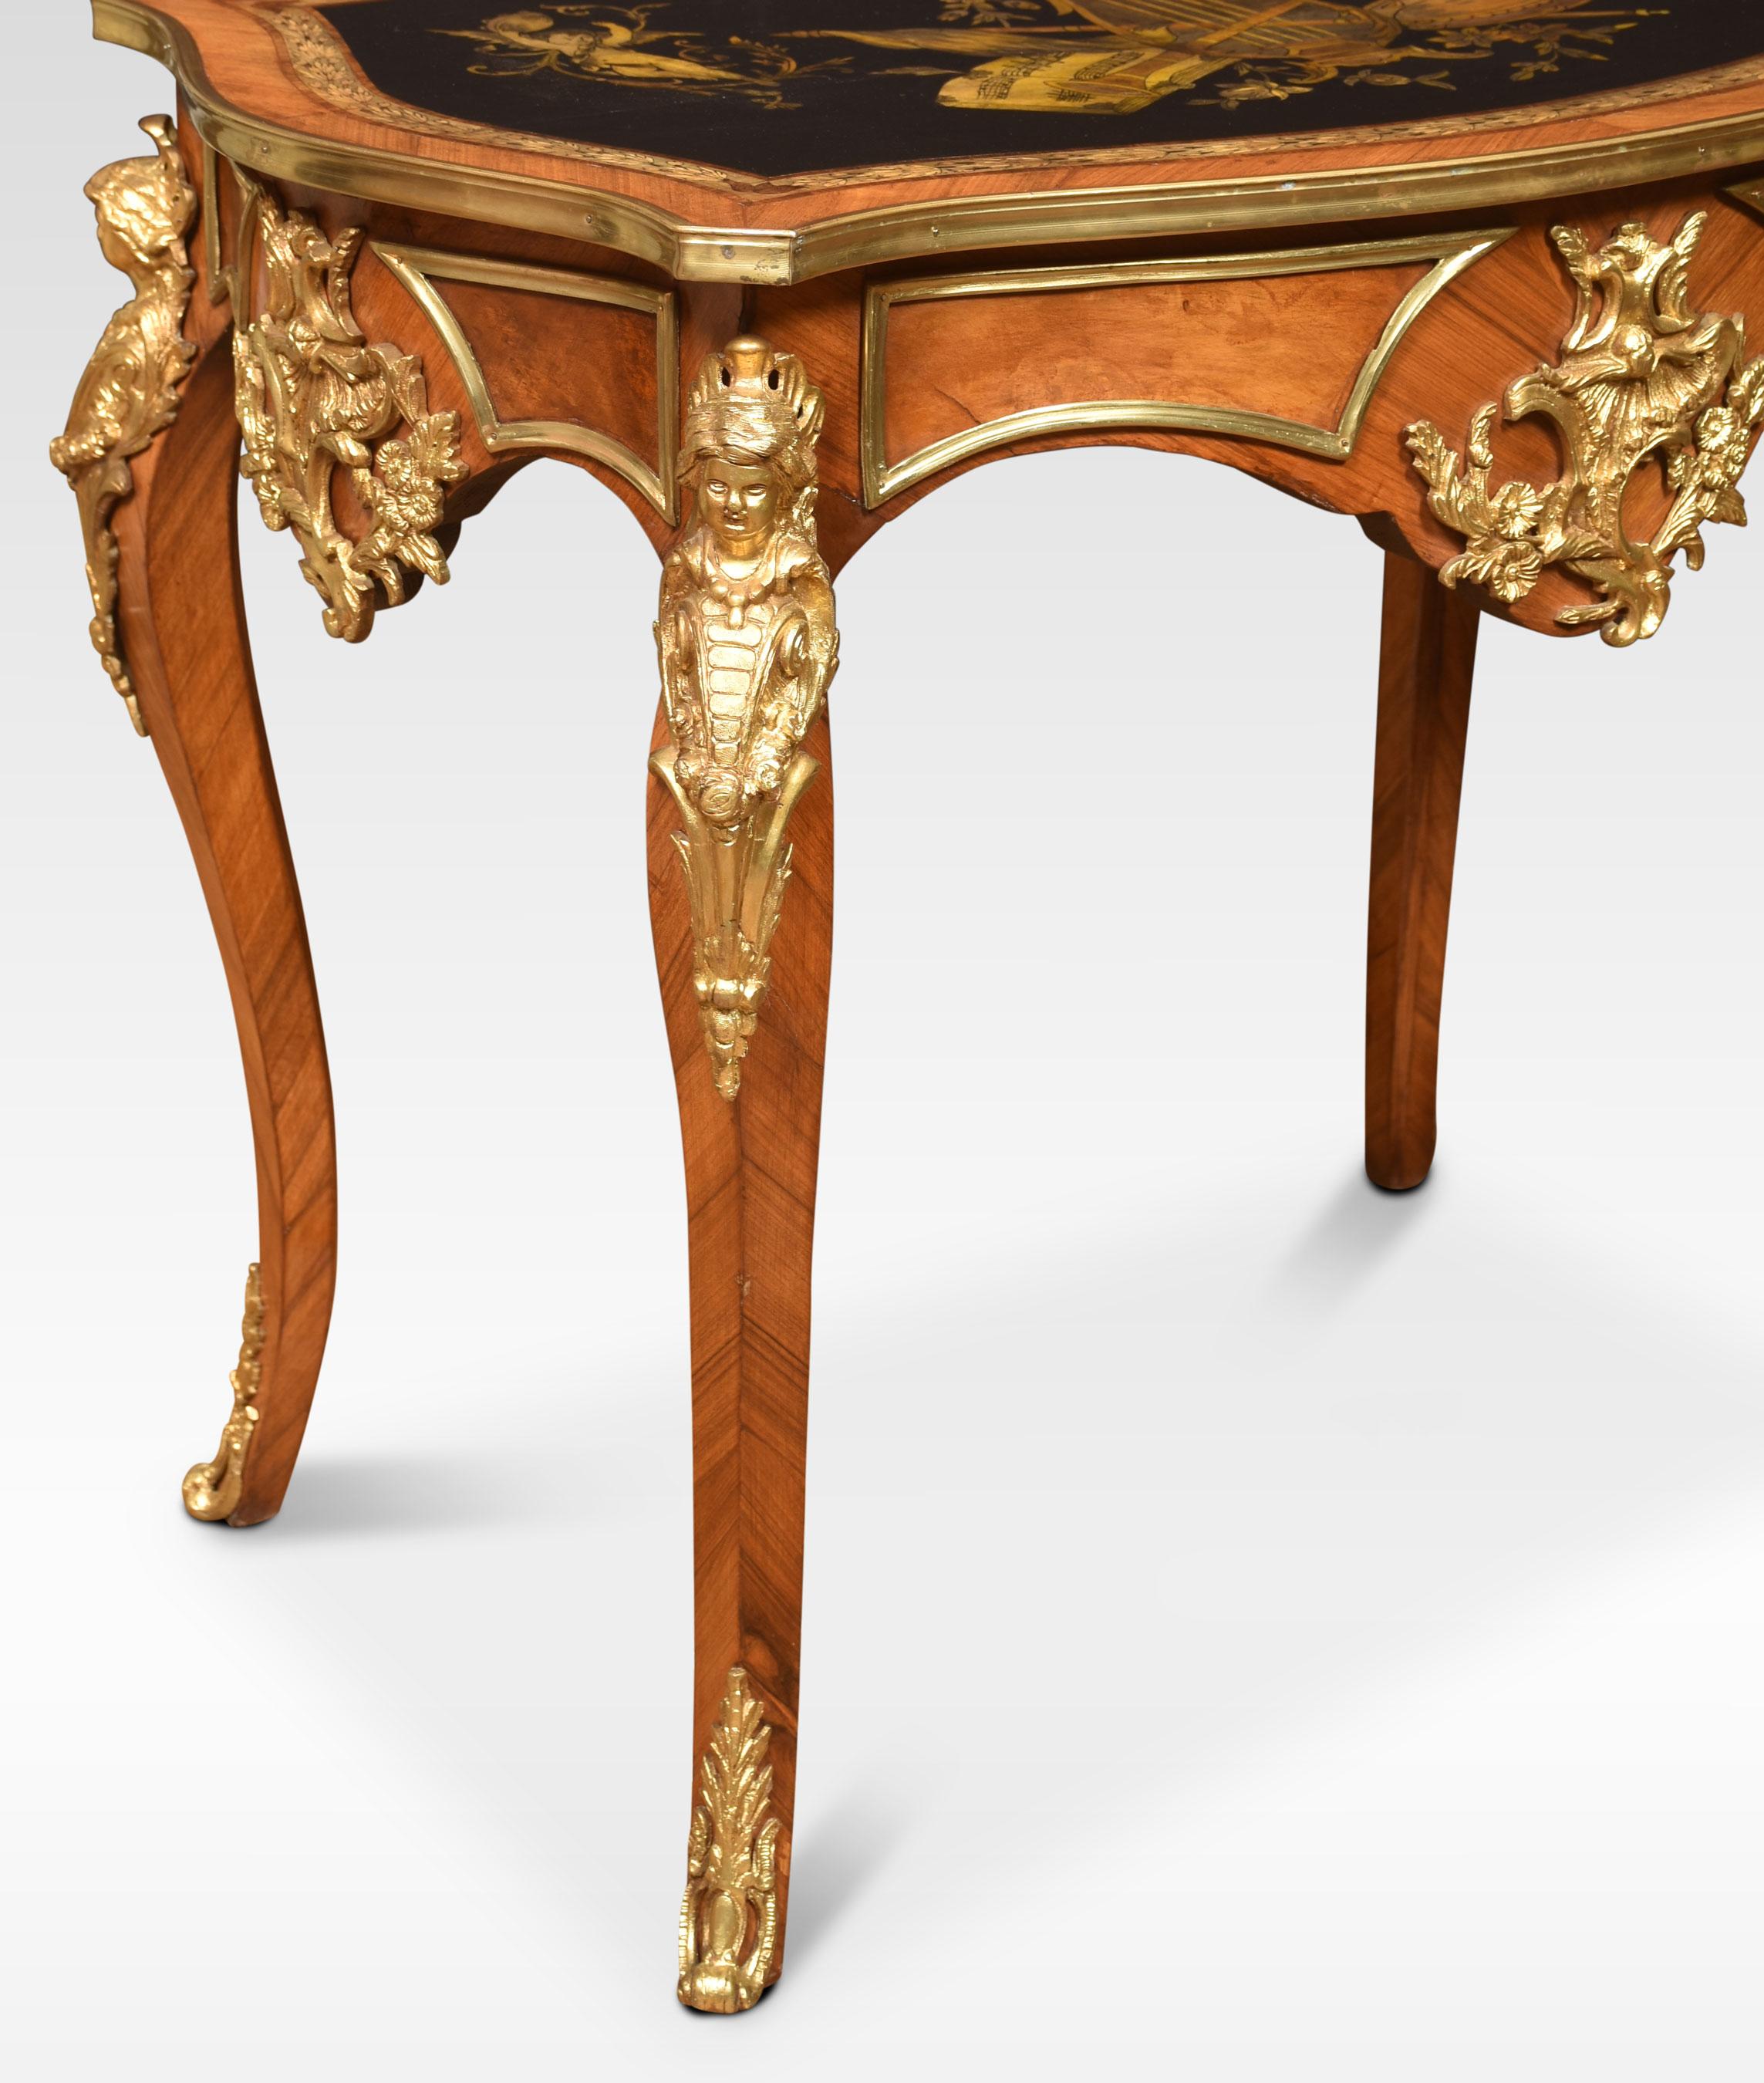 French walnut centre table of cartouche outline, the ebonised top inlaid with musical instruments and garlands flanked by cherubs and birds, with decorative gilt metal mounts to the apron. All raised up on four cabriole legs.
Dimensions
Height 30.5